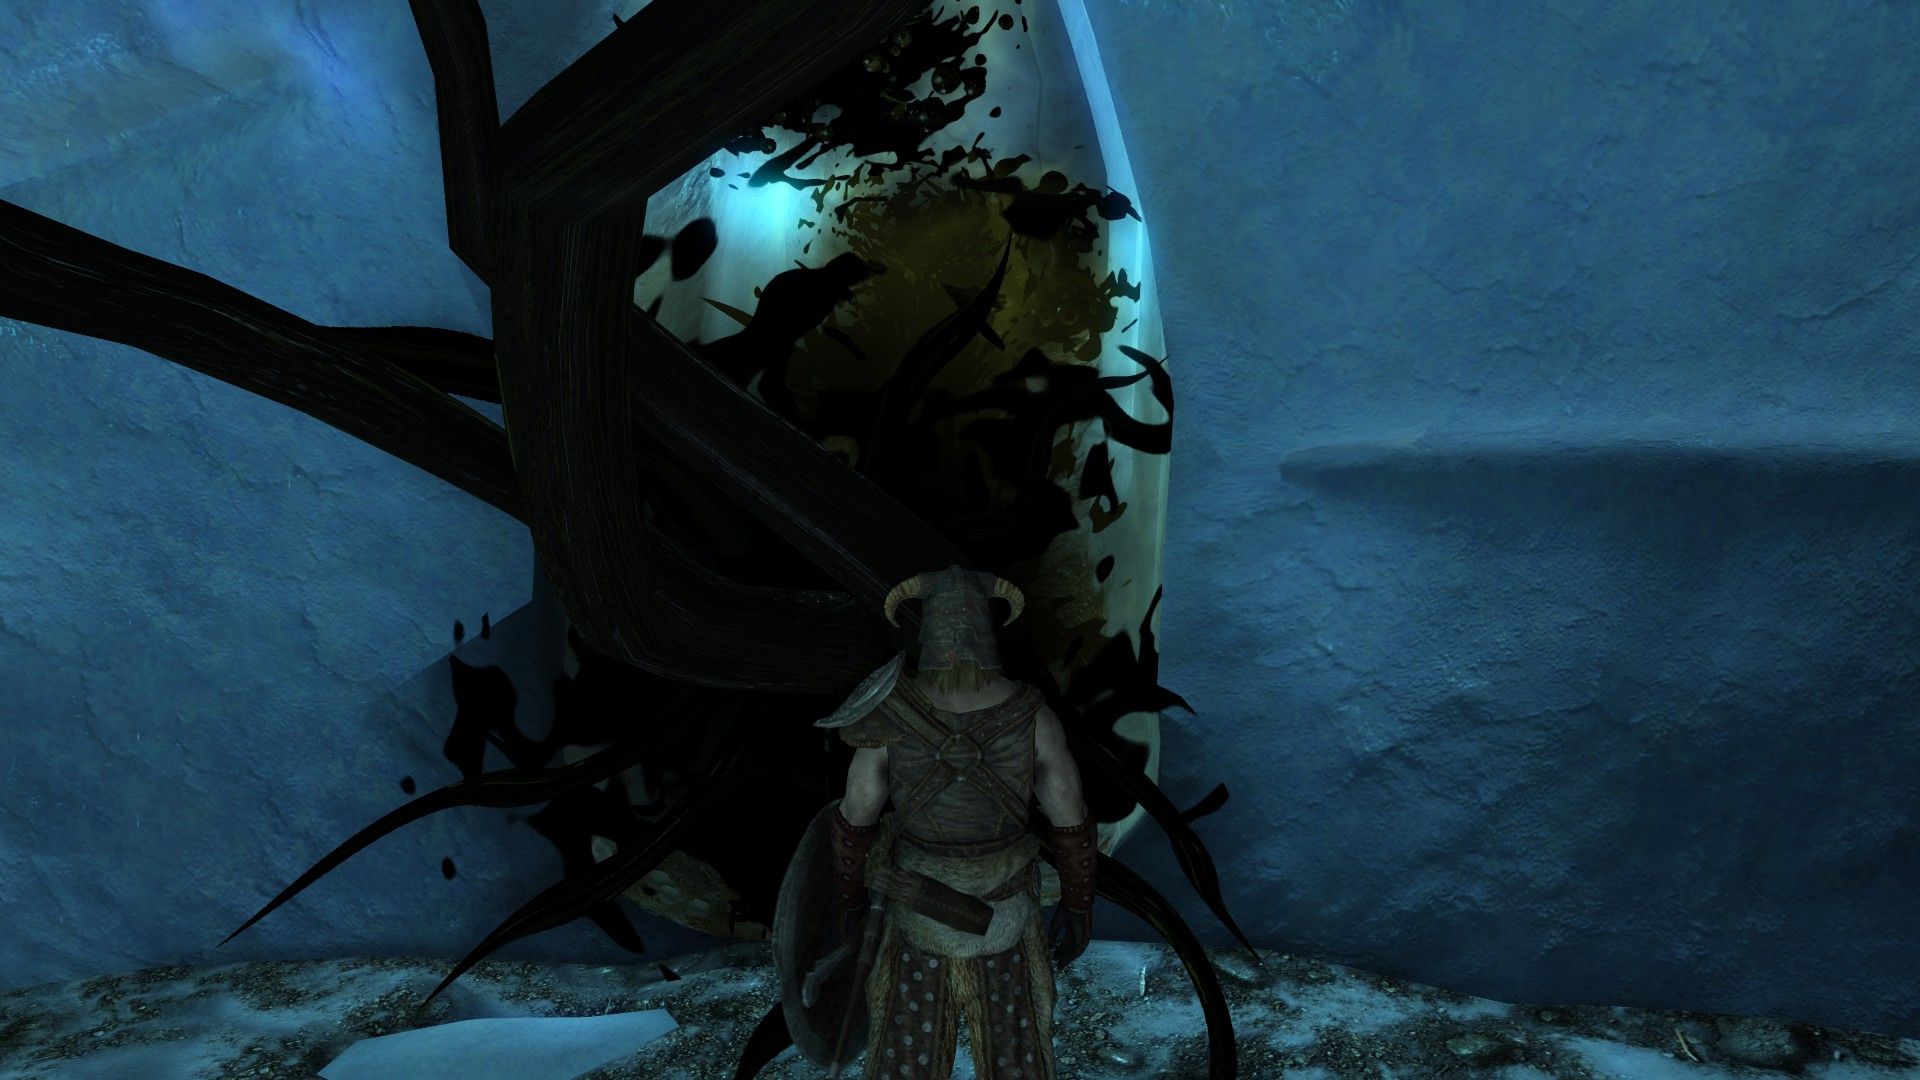 An adventurer stares at a writhing mass of black tentacles emerging from the exit of a frozen cave.